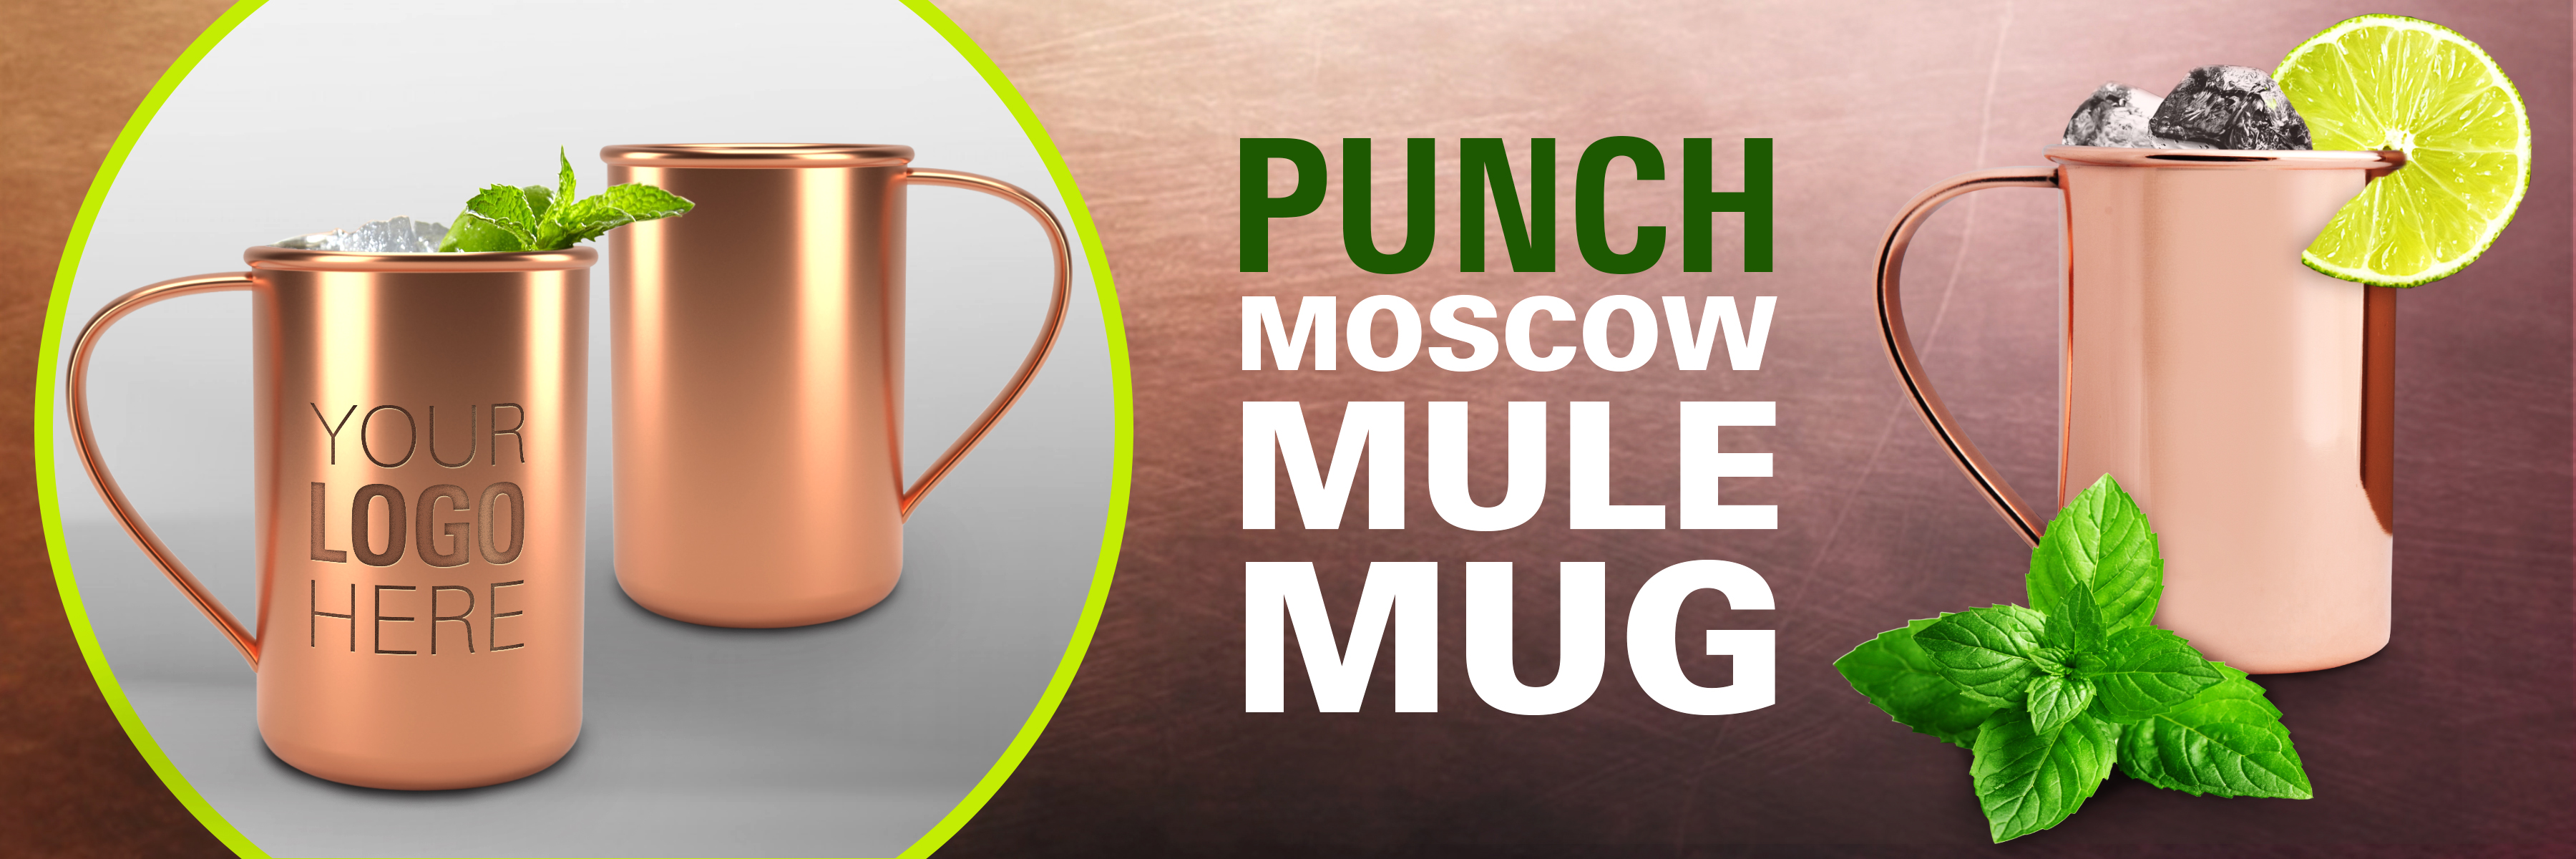 Punch Moscow Mule